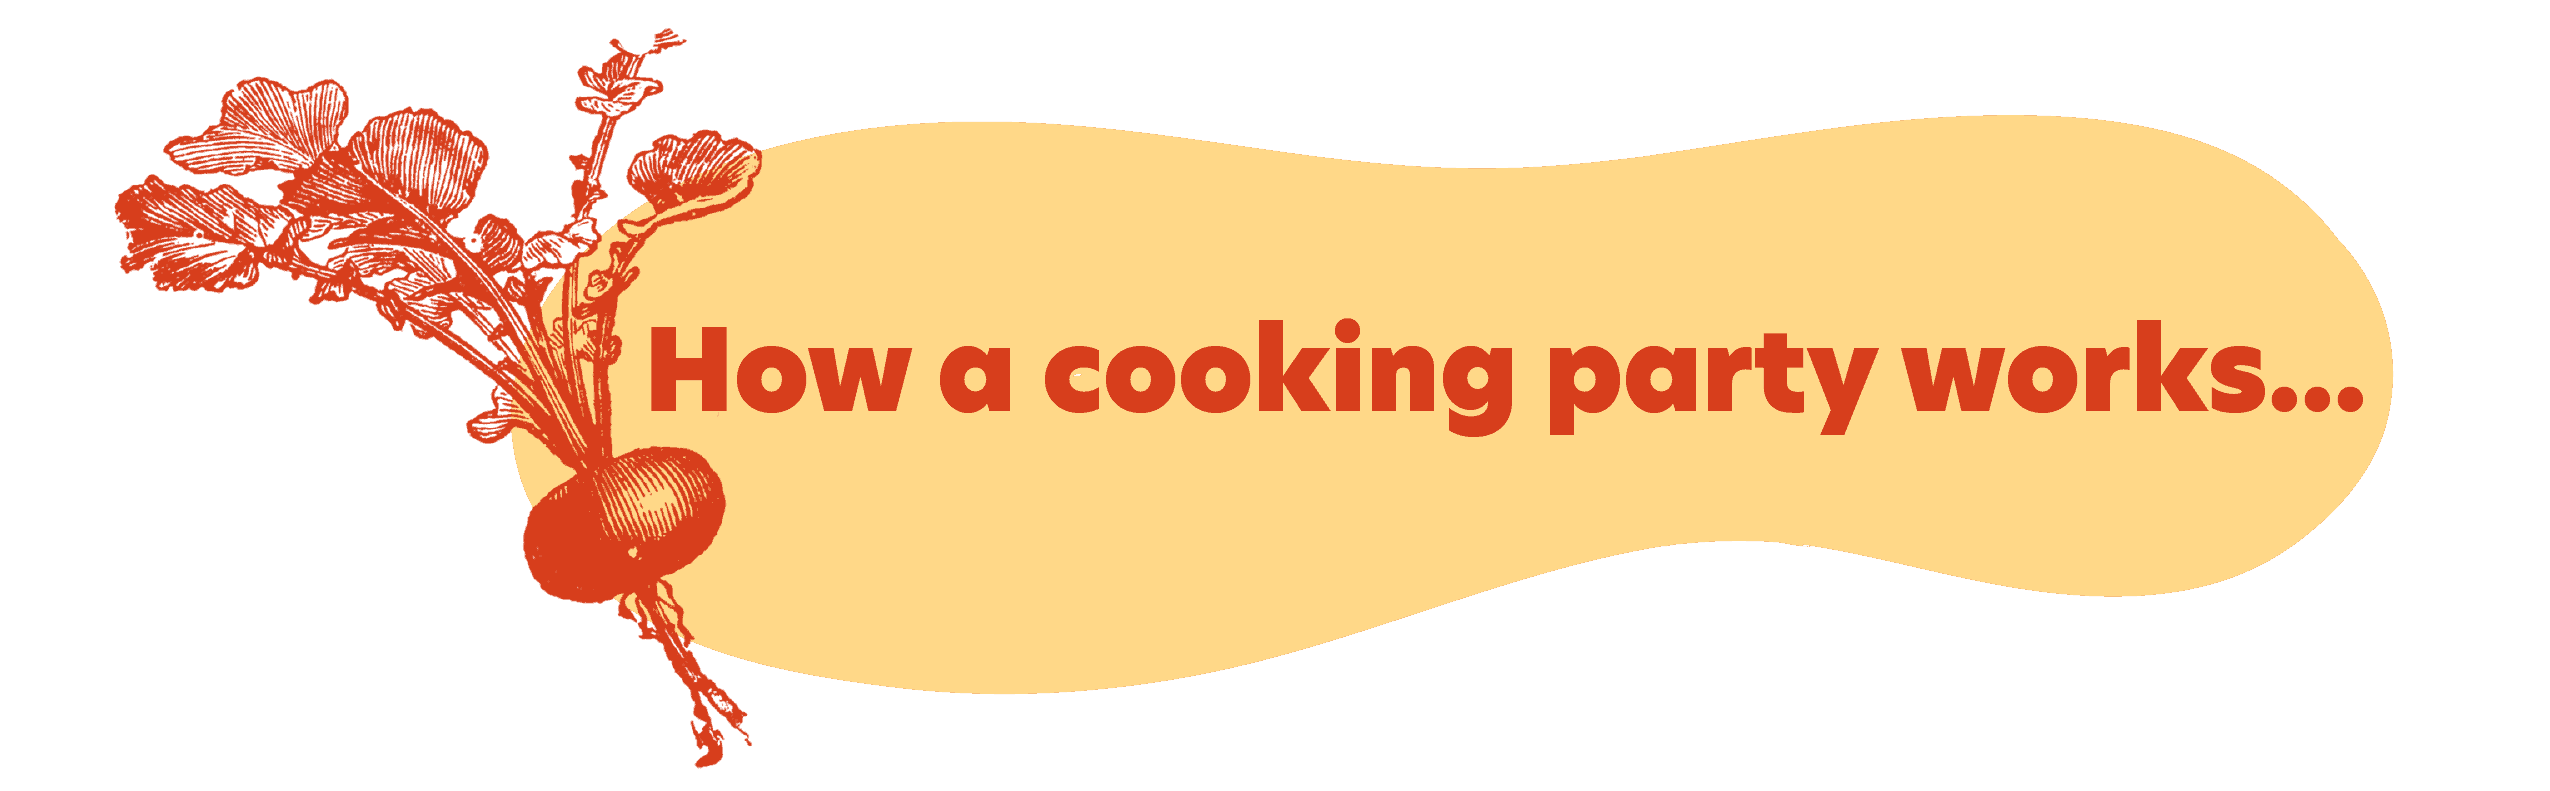 How a cooking party works